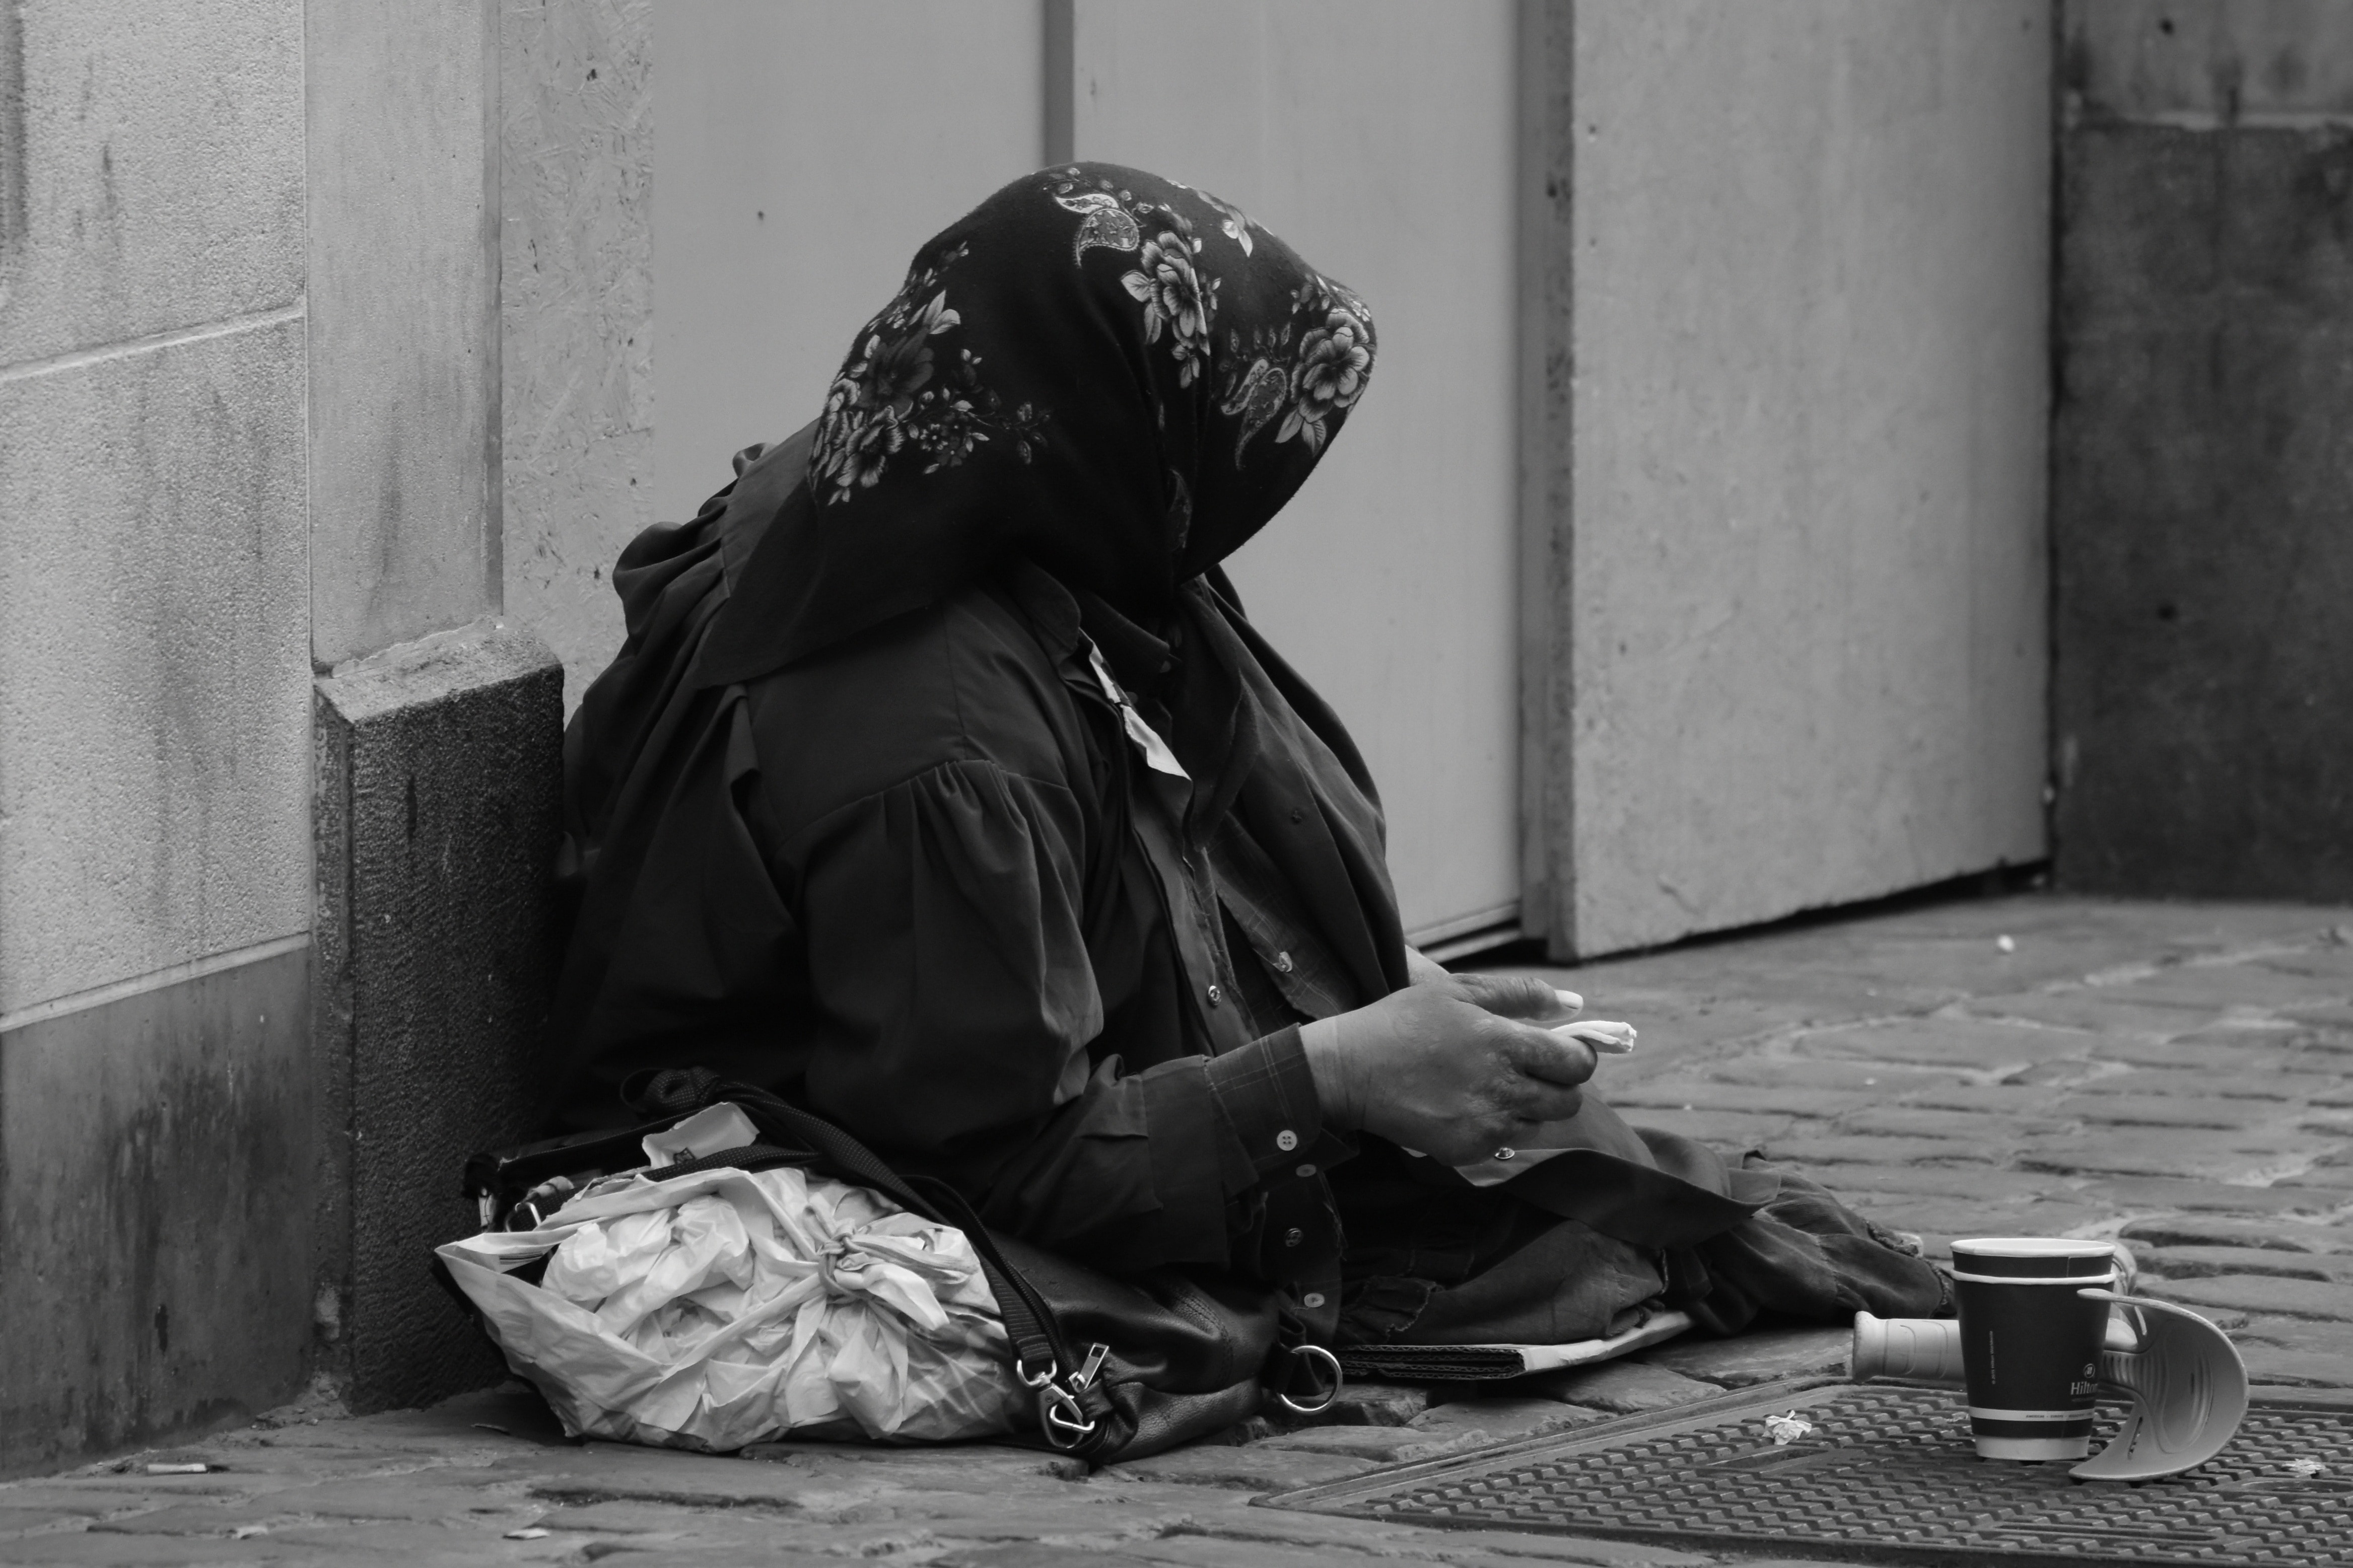 grayscale photo of person in black coat sitting on pavement